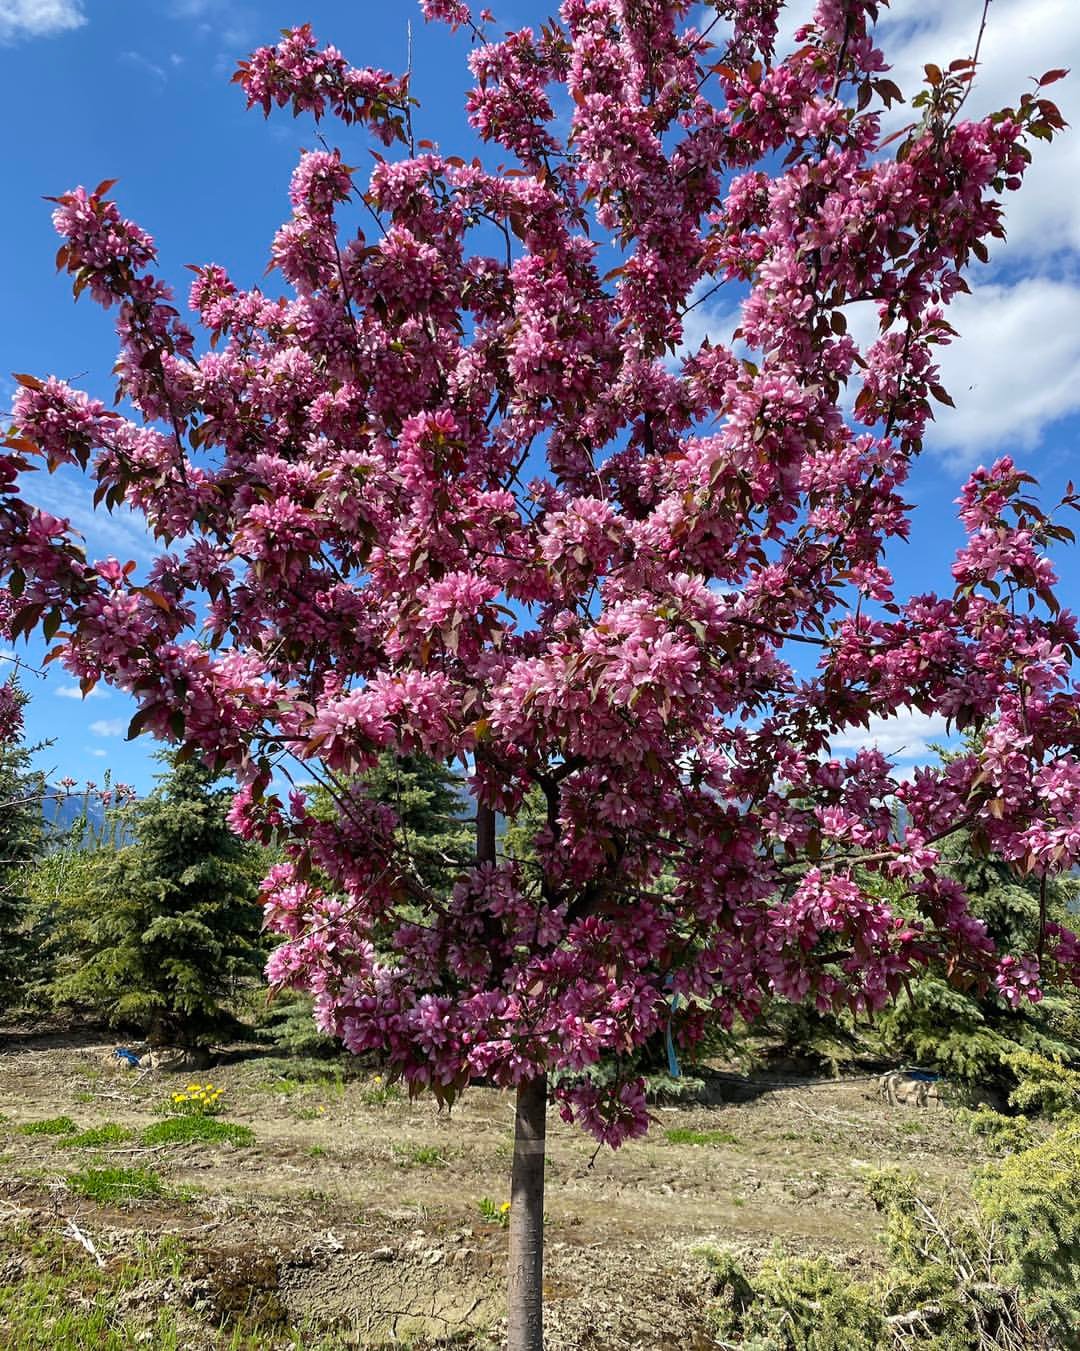 Pink crabapple tree blossoming in field.